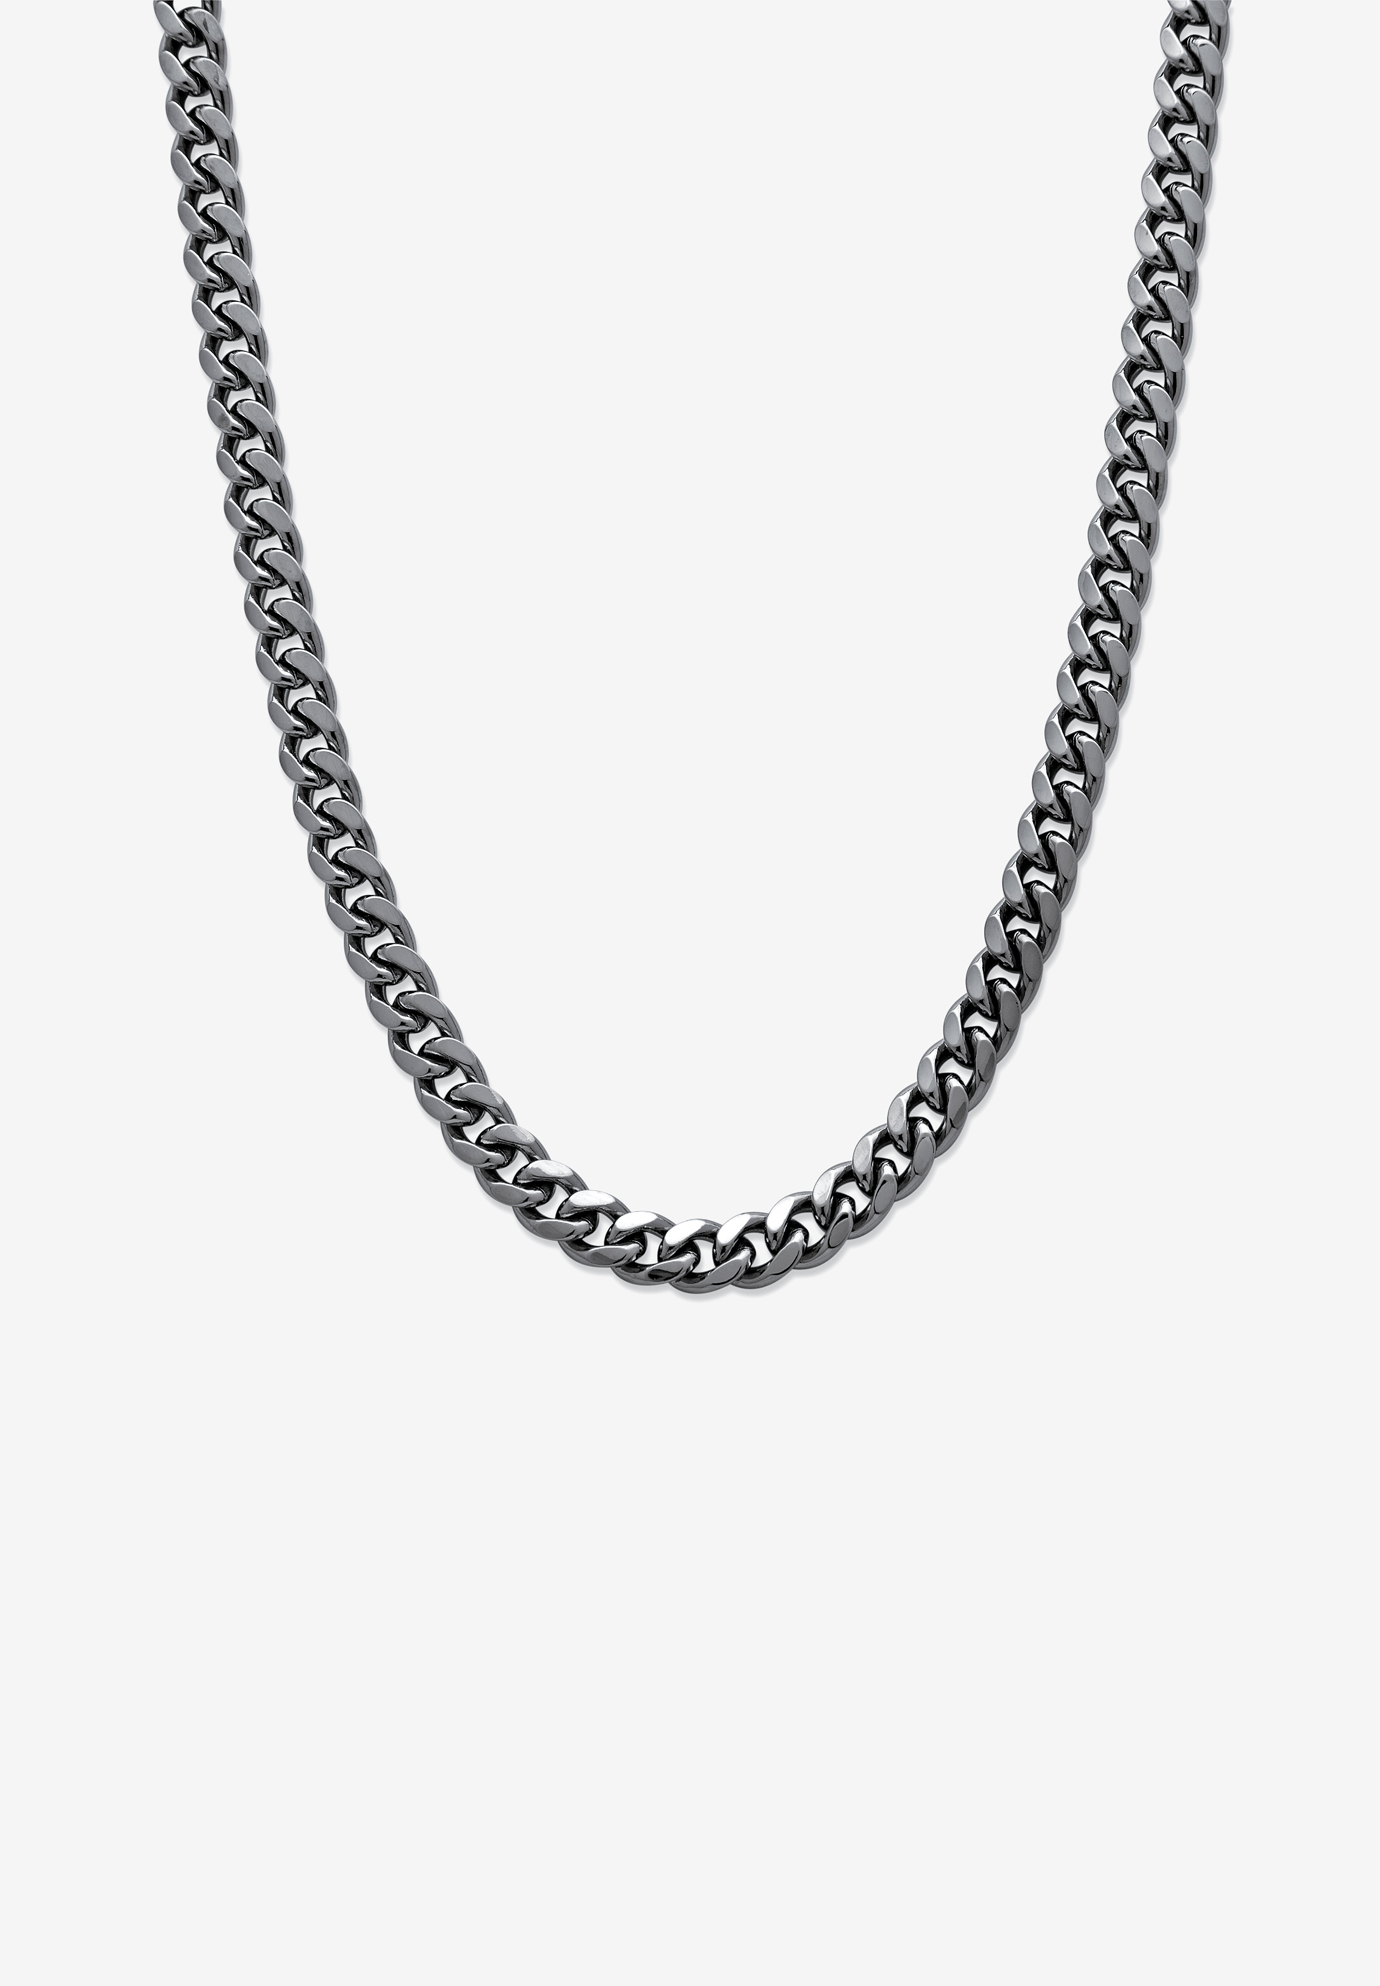 Men&apos;s Black Ruthenium Plated Curb Link Chain Necklace (10.5mm), 24 inches, BLACK